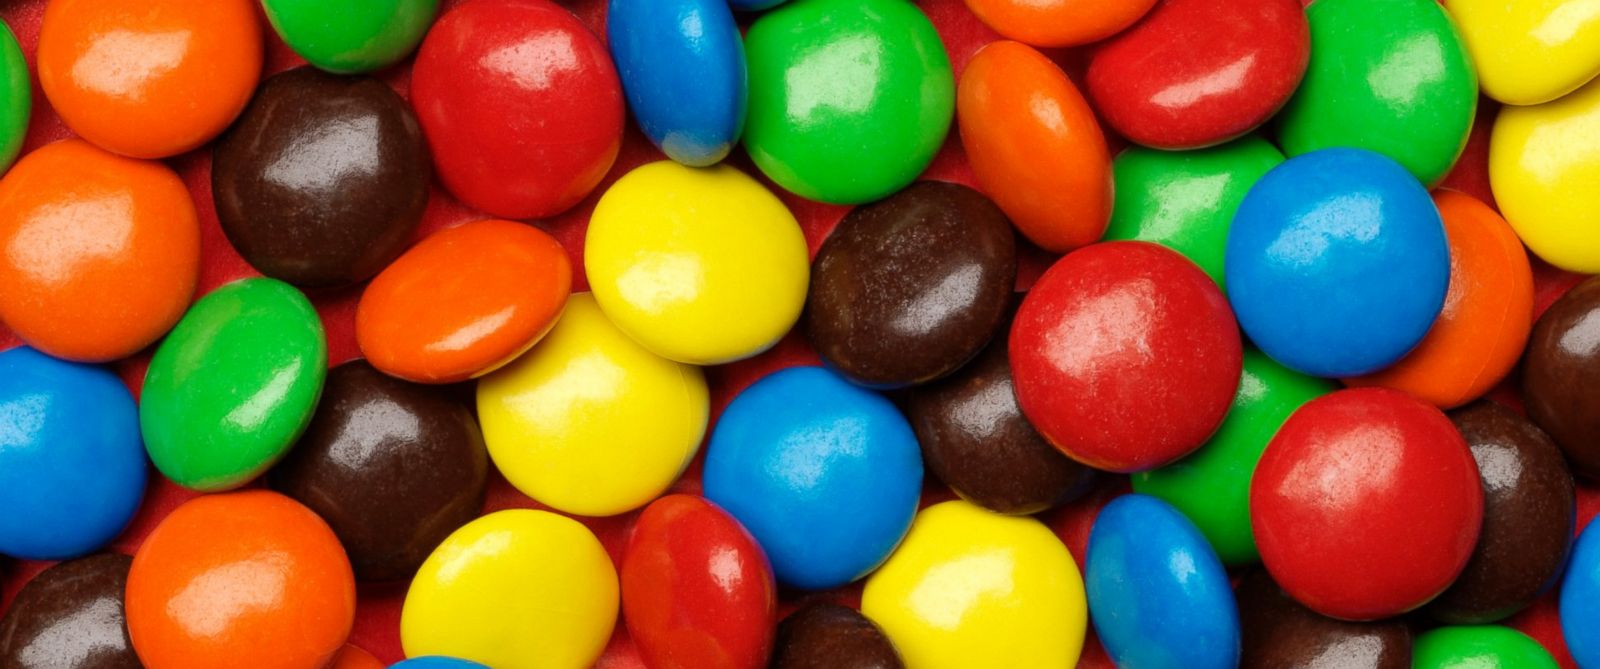 Candy Backgrounds, Compatible - PC, Mobile, Gadgets| 1600x669 px